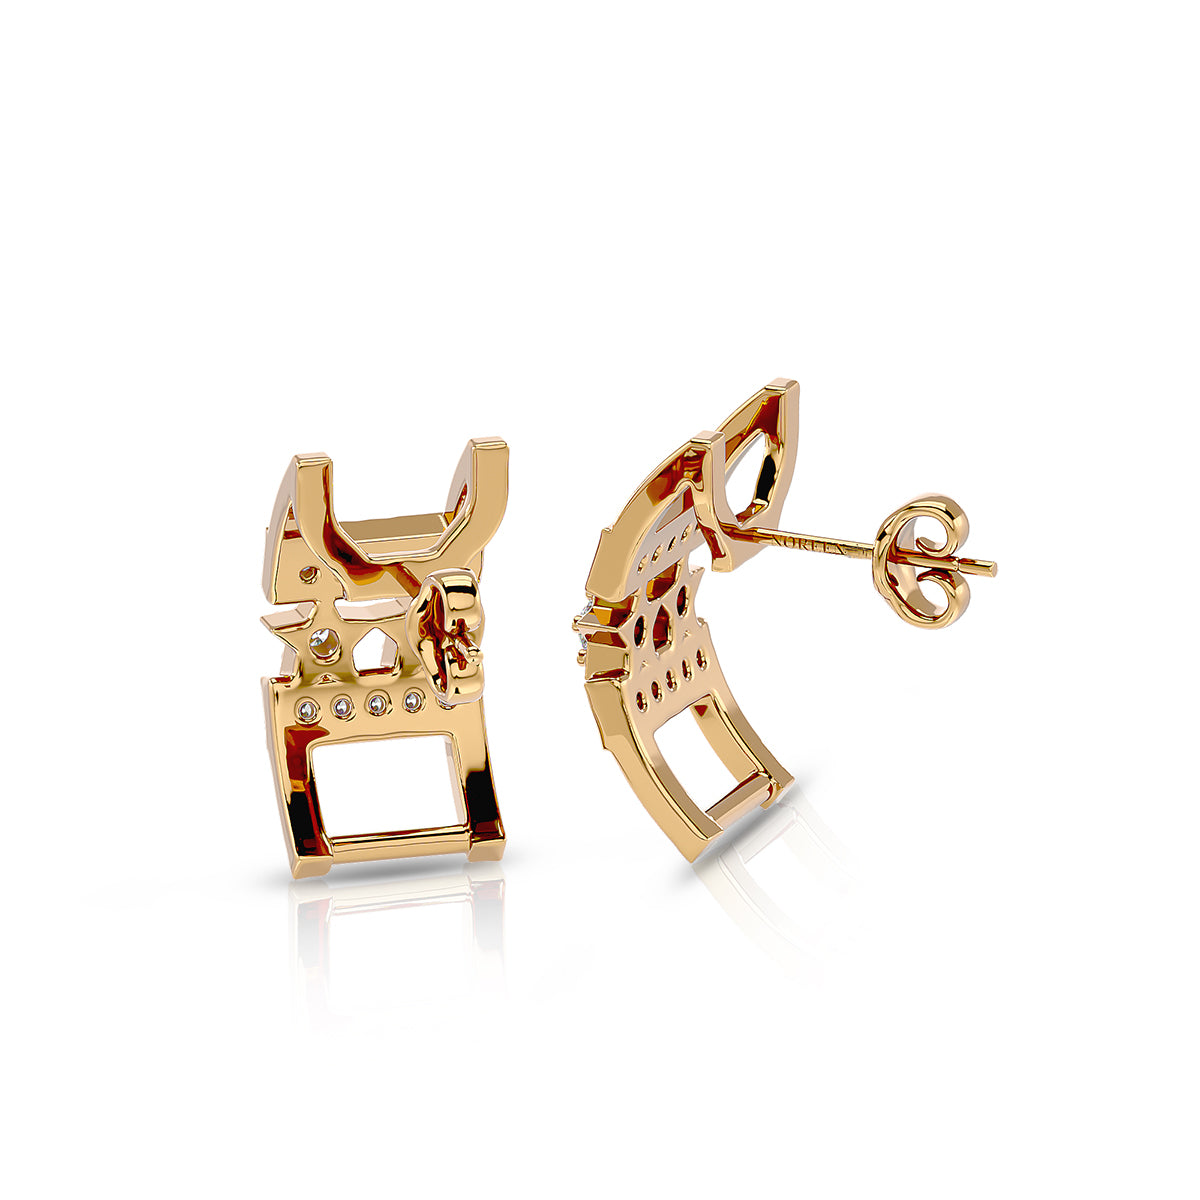 Empowerment Earrings 18K Gold With Diamonds